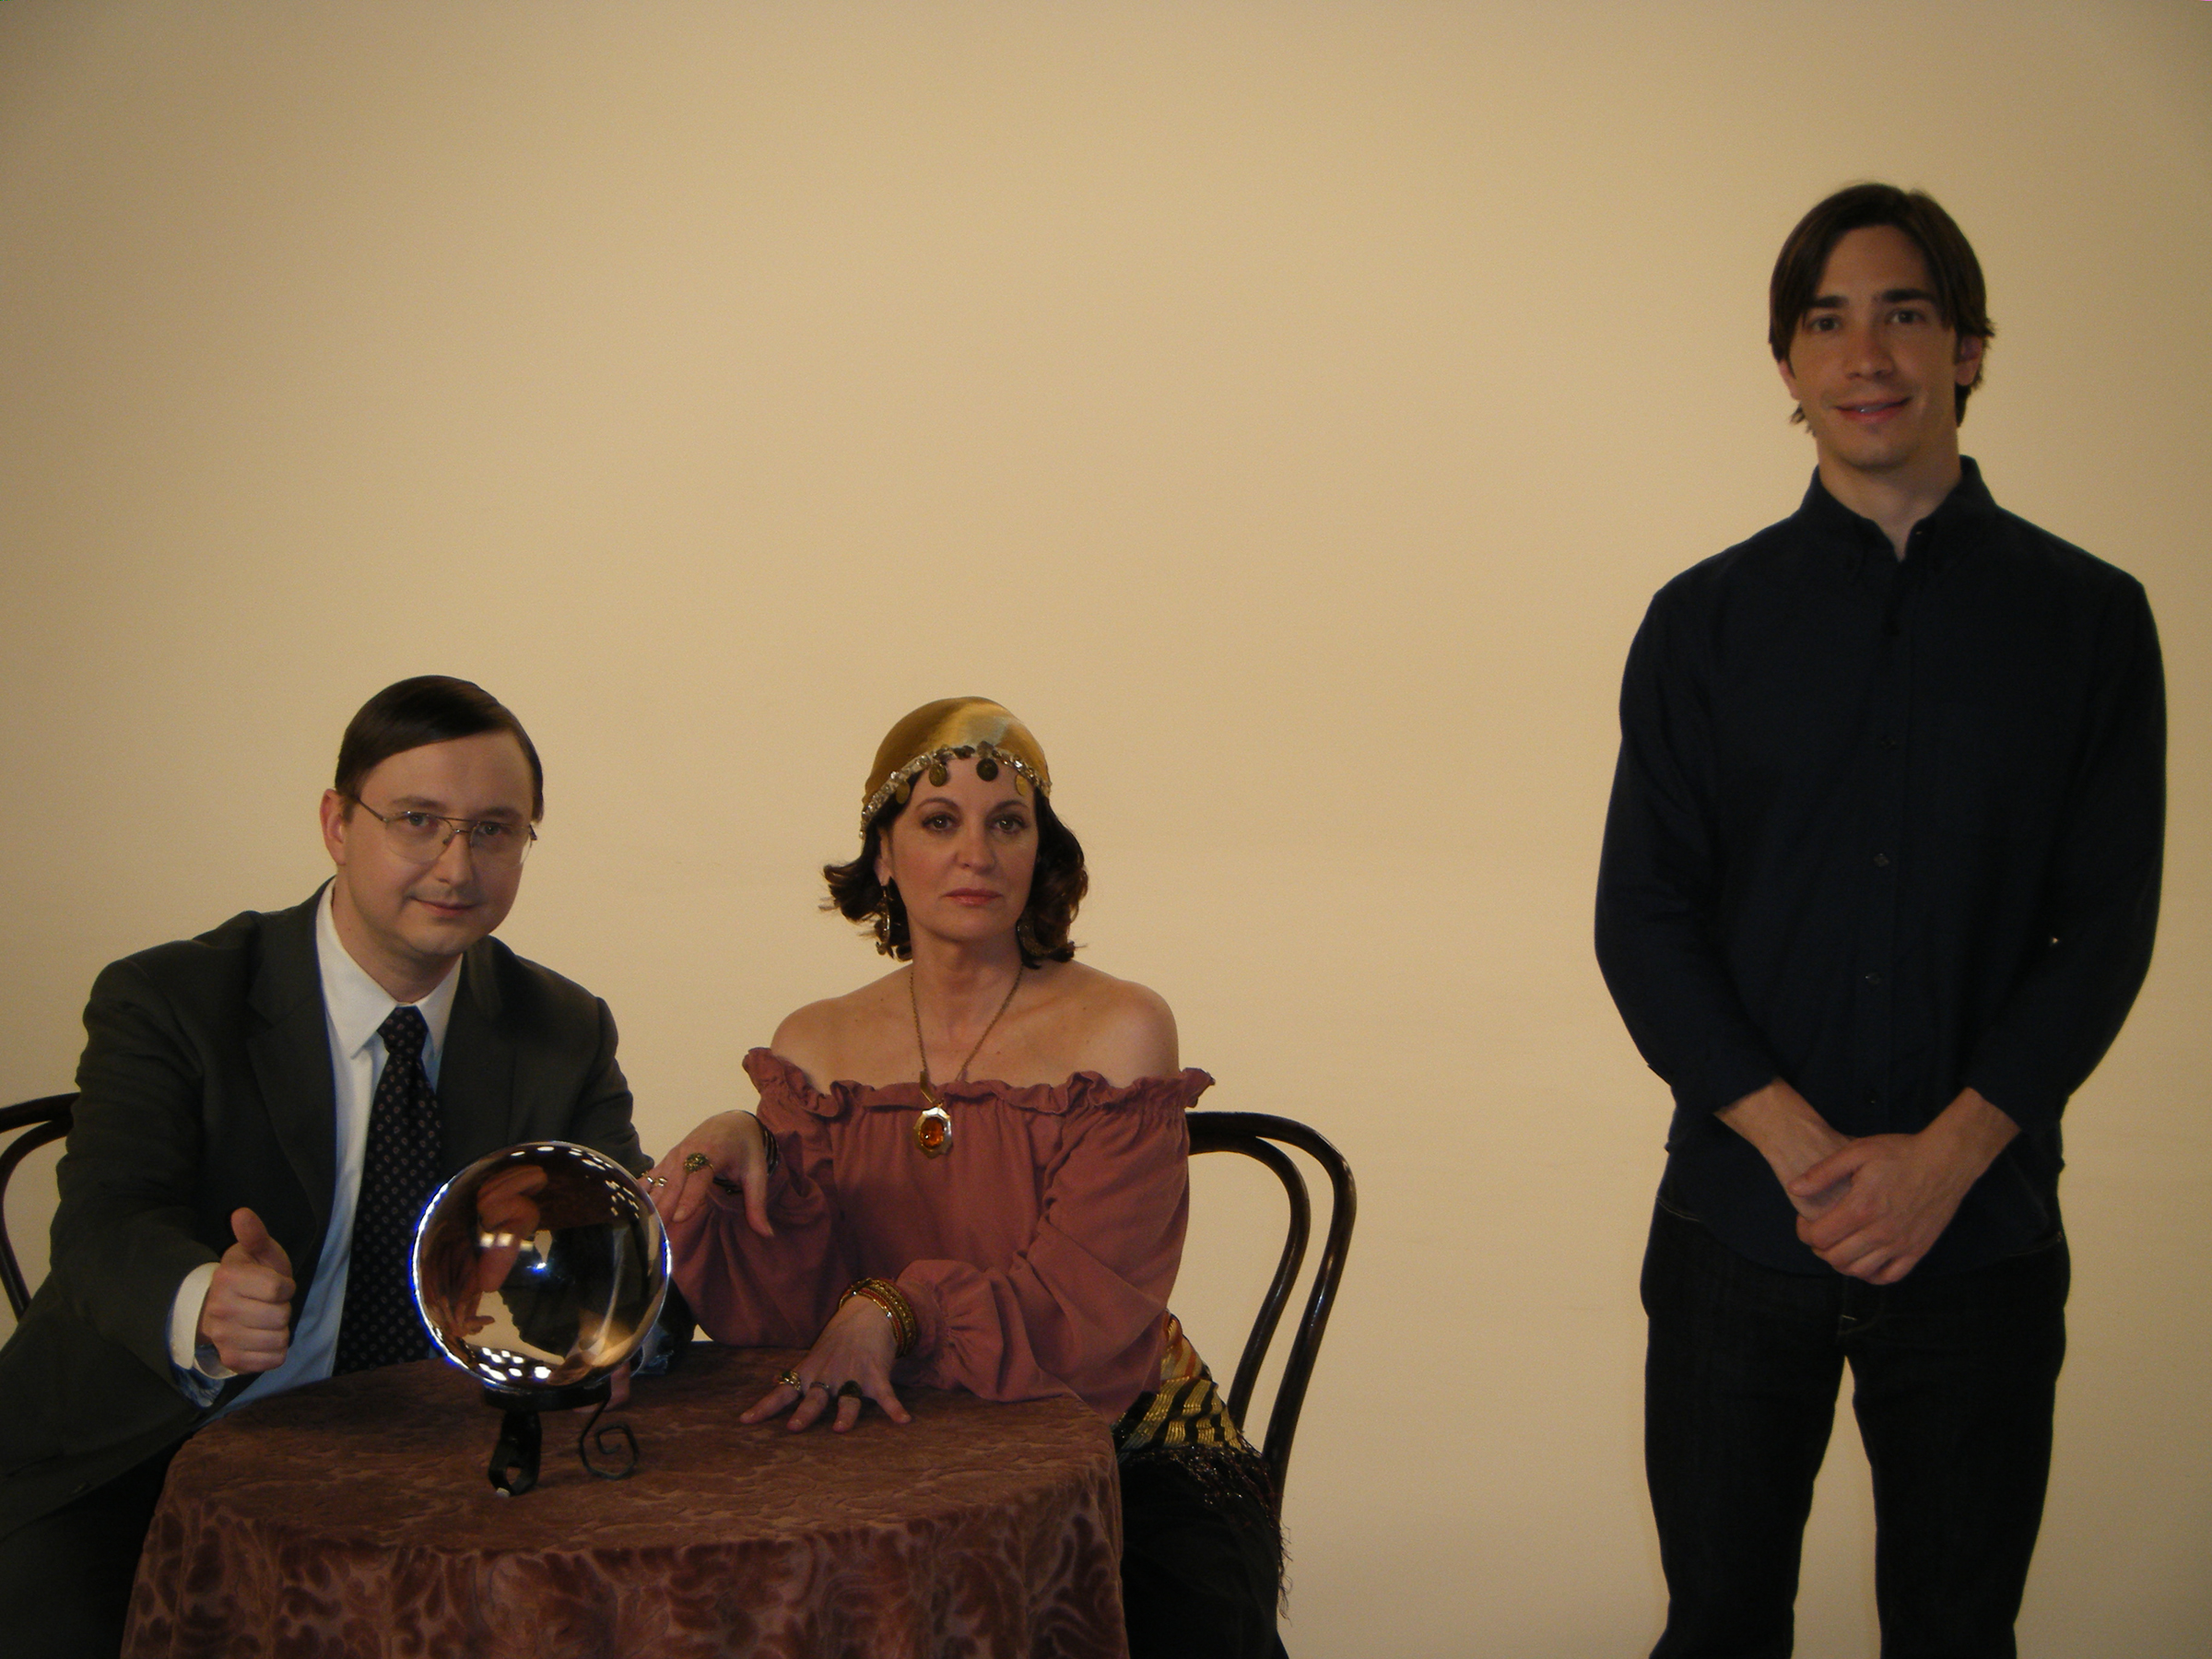 Kathleen Garrett in a Mac commercial with Justin Long and John Hodgman.